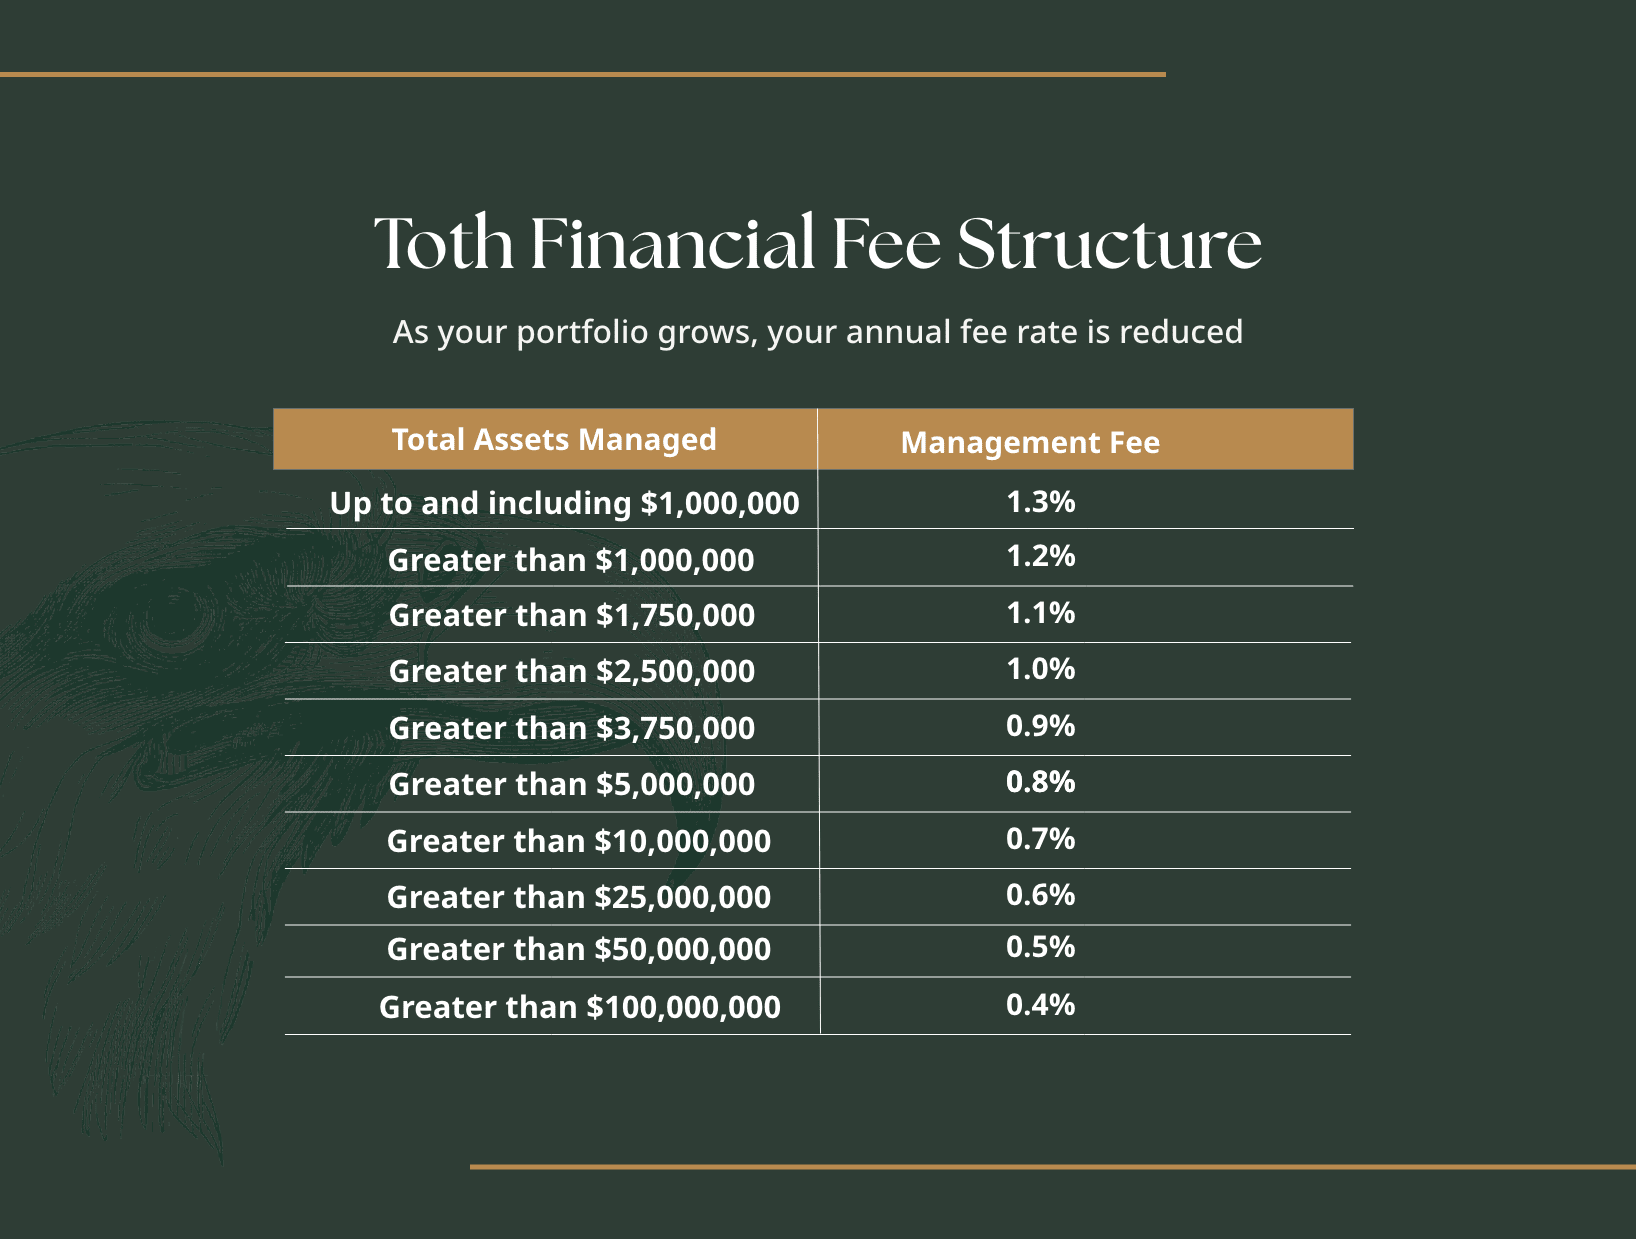 Toth Financial Fee Structure